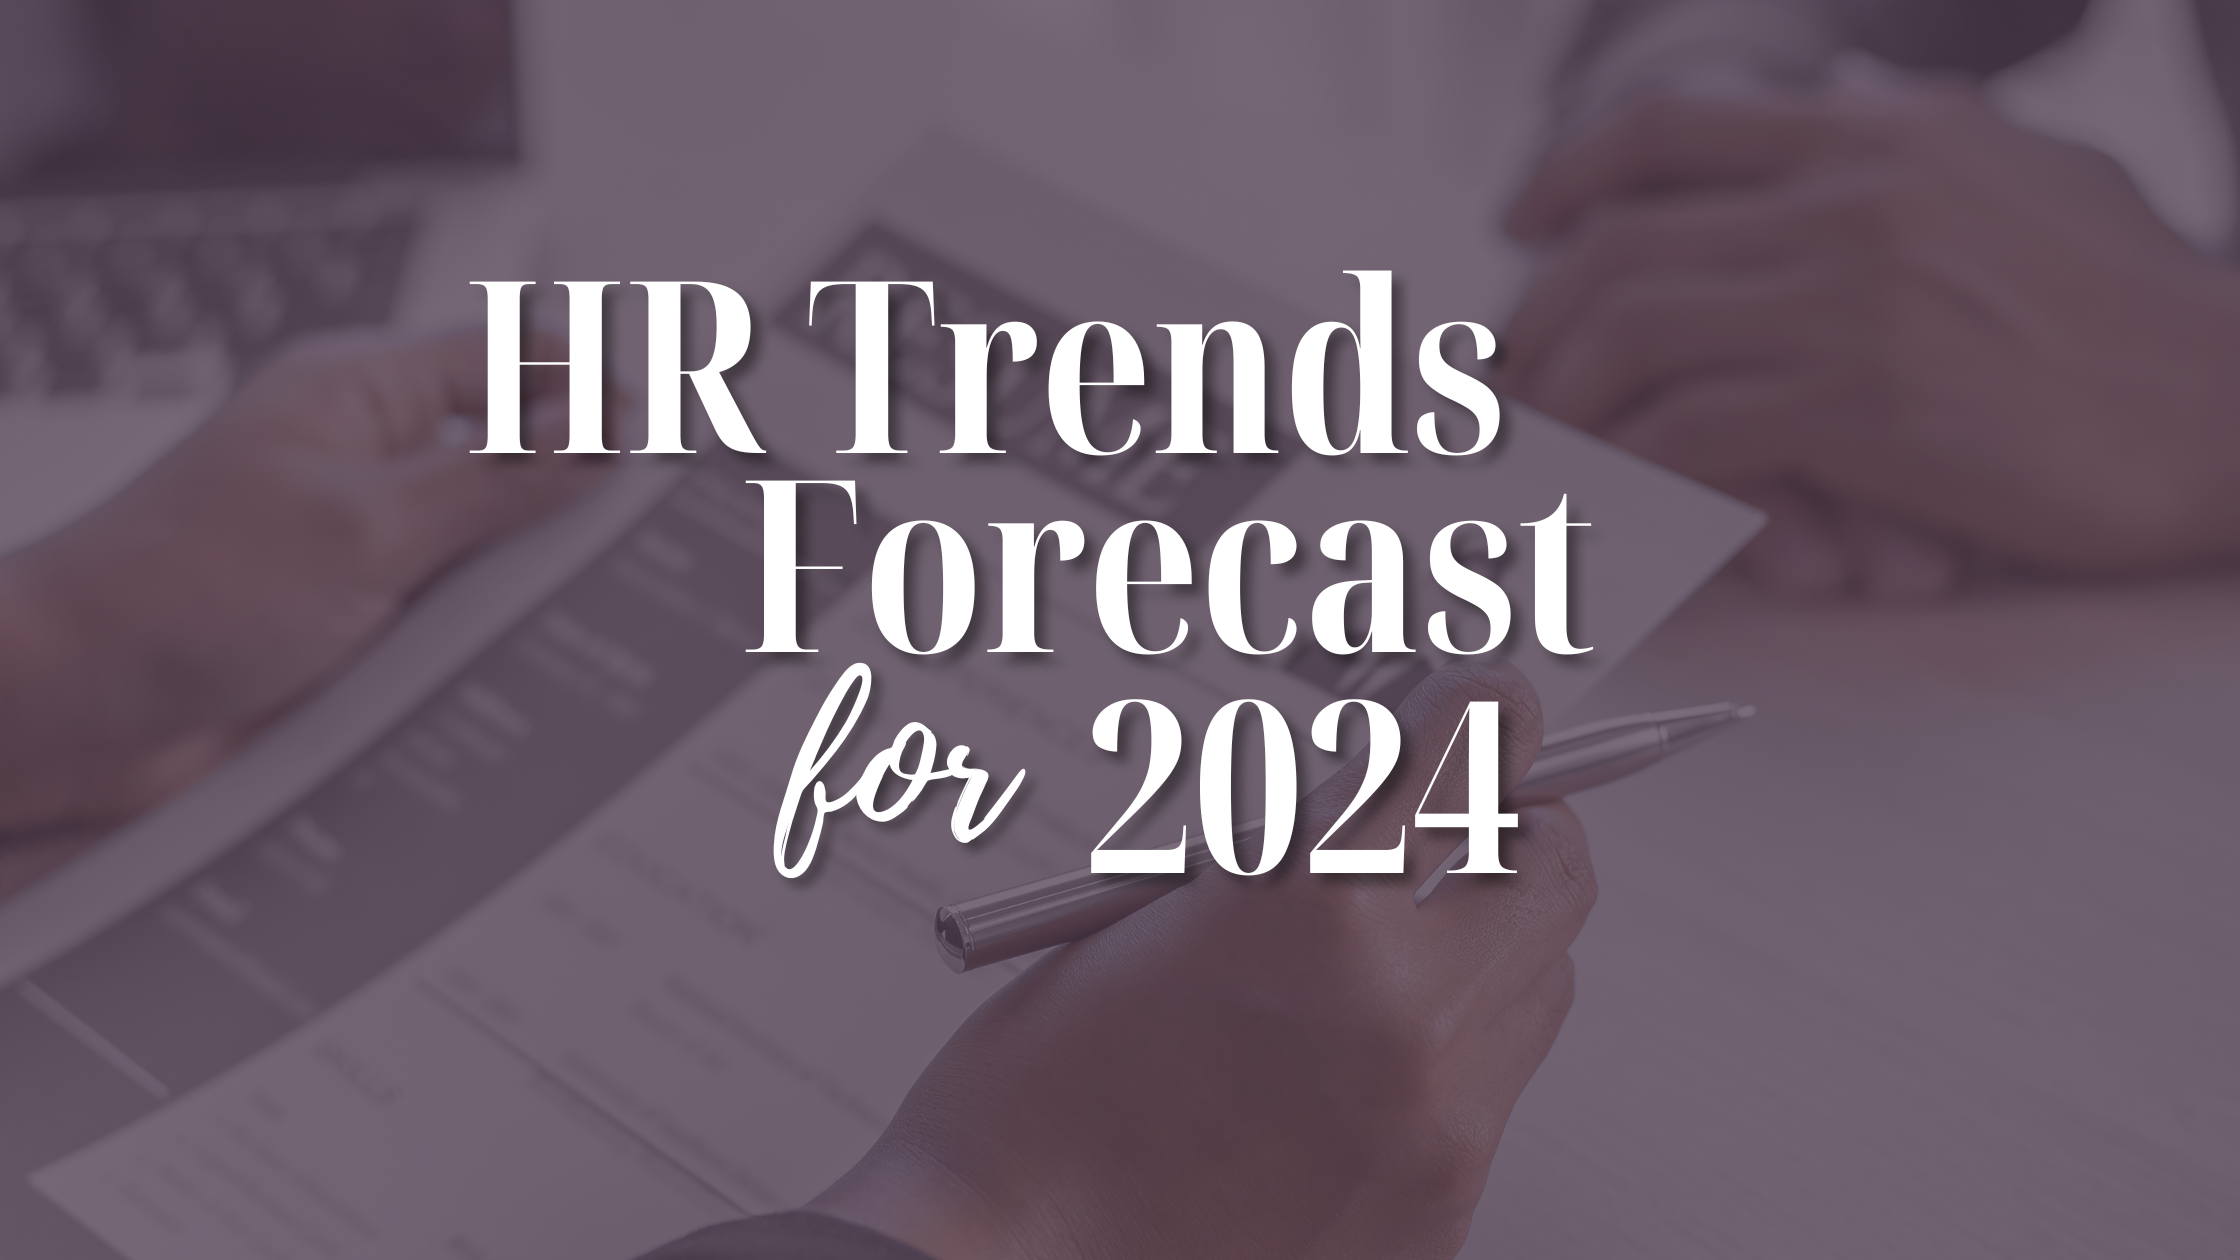 HR Trends Forecast for 2024